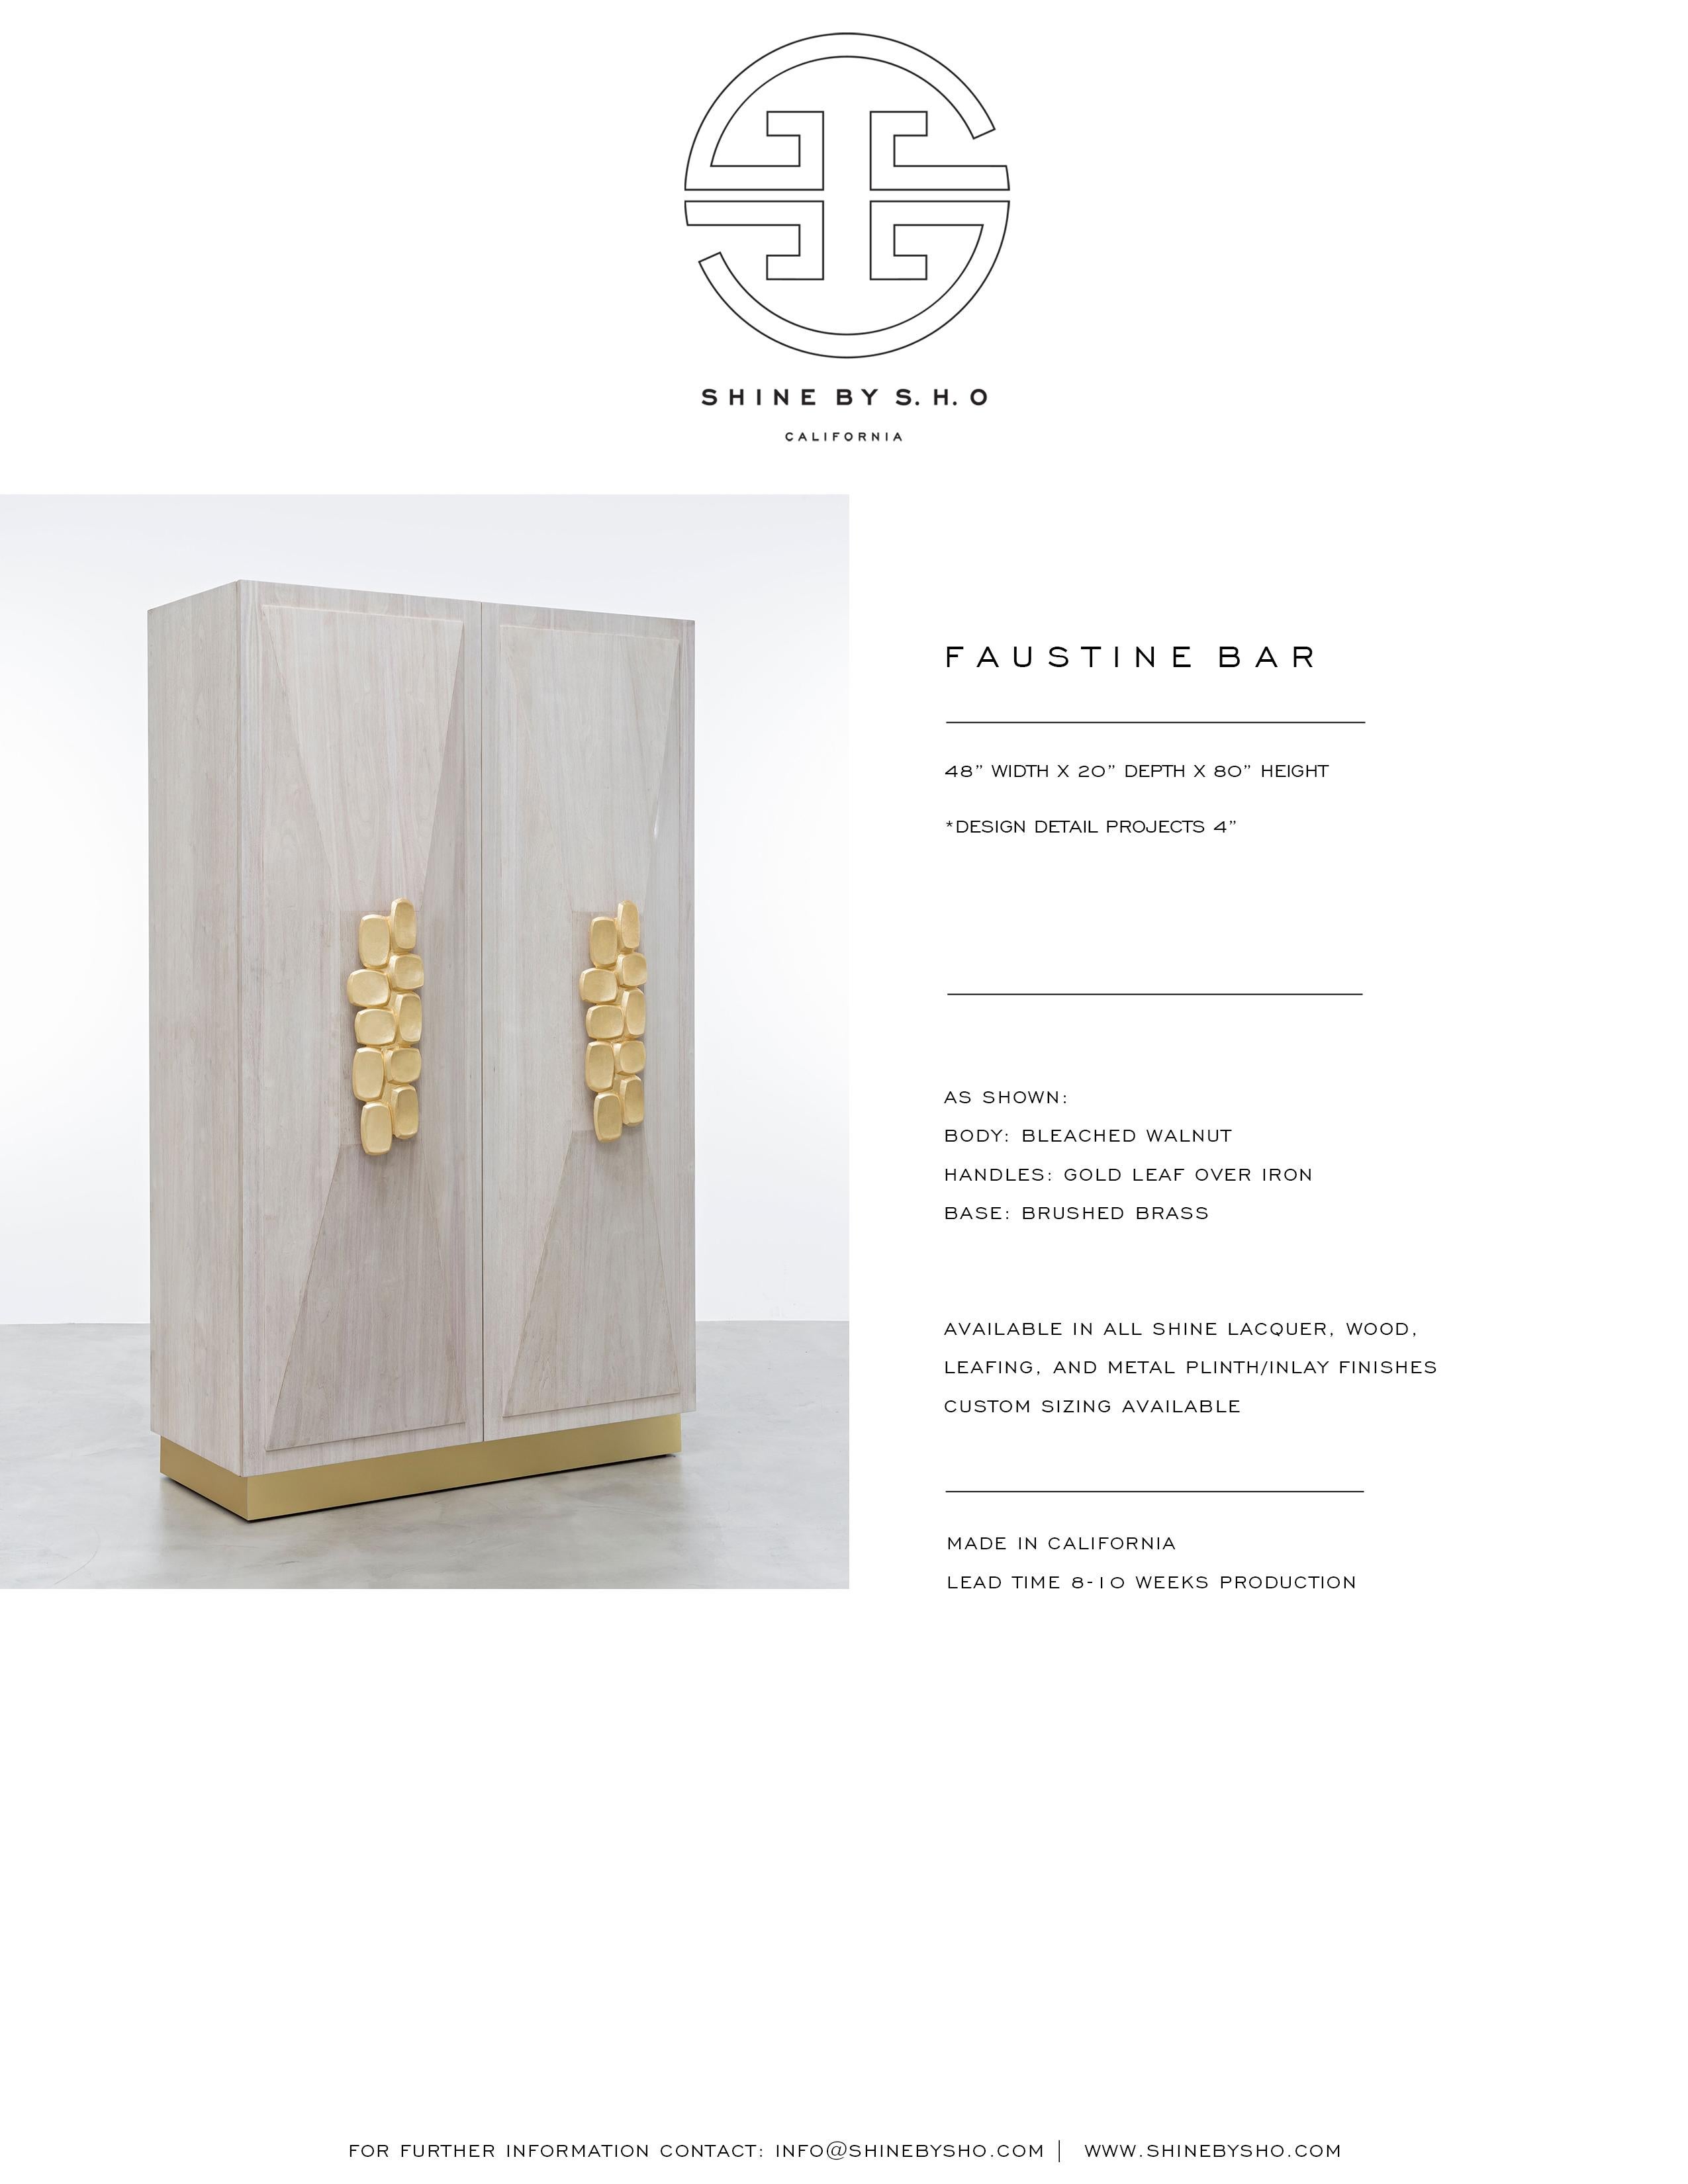 Gold Leaf FAUSTINE BAR CABINET - Modern Bleached Walnut Cabinet with Hand Forged Handles For Sale